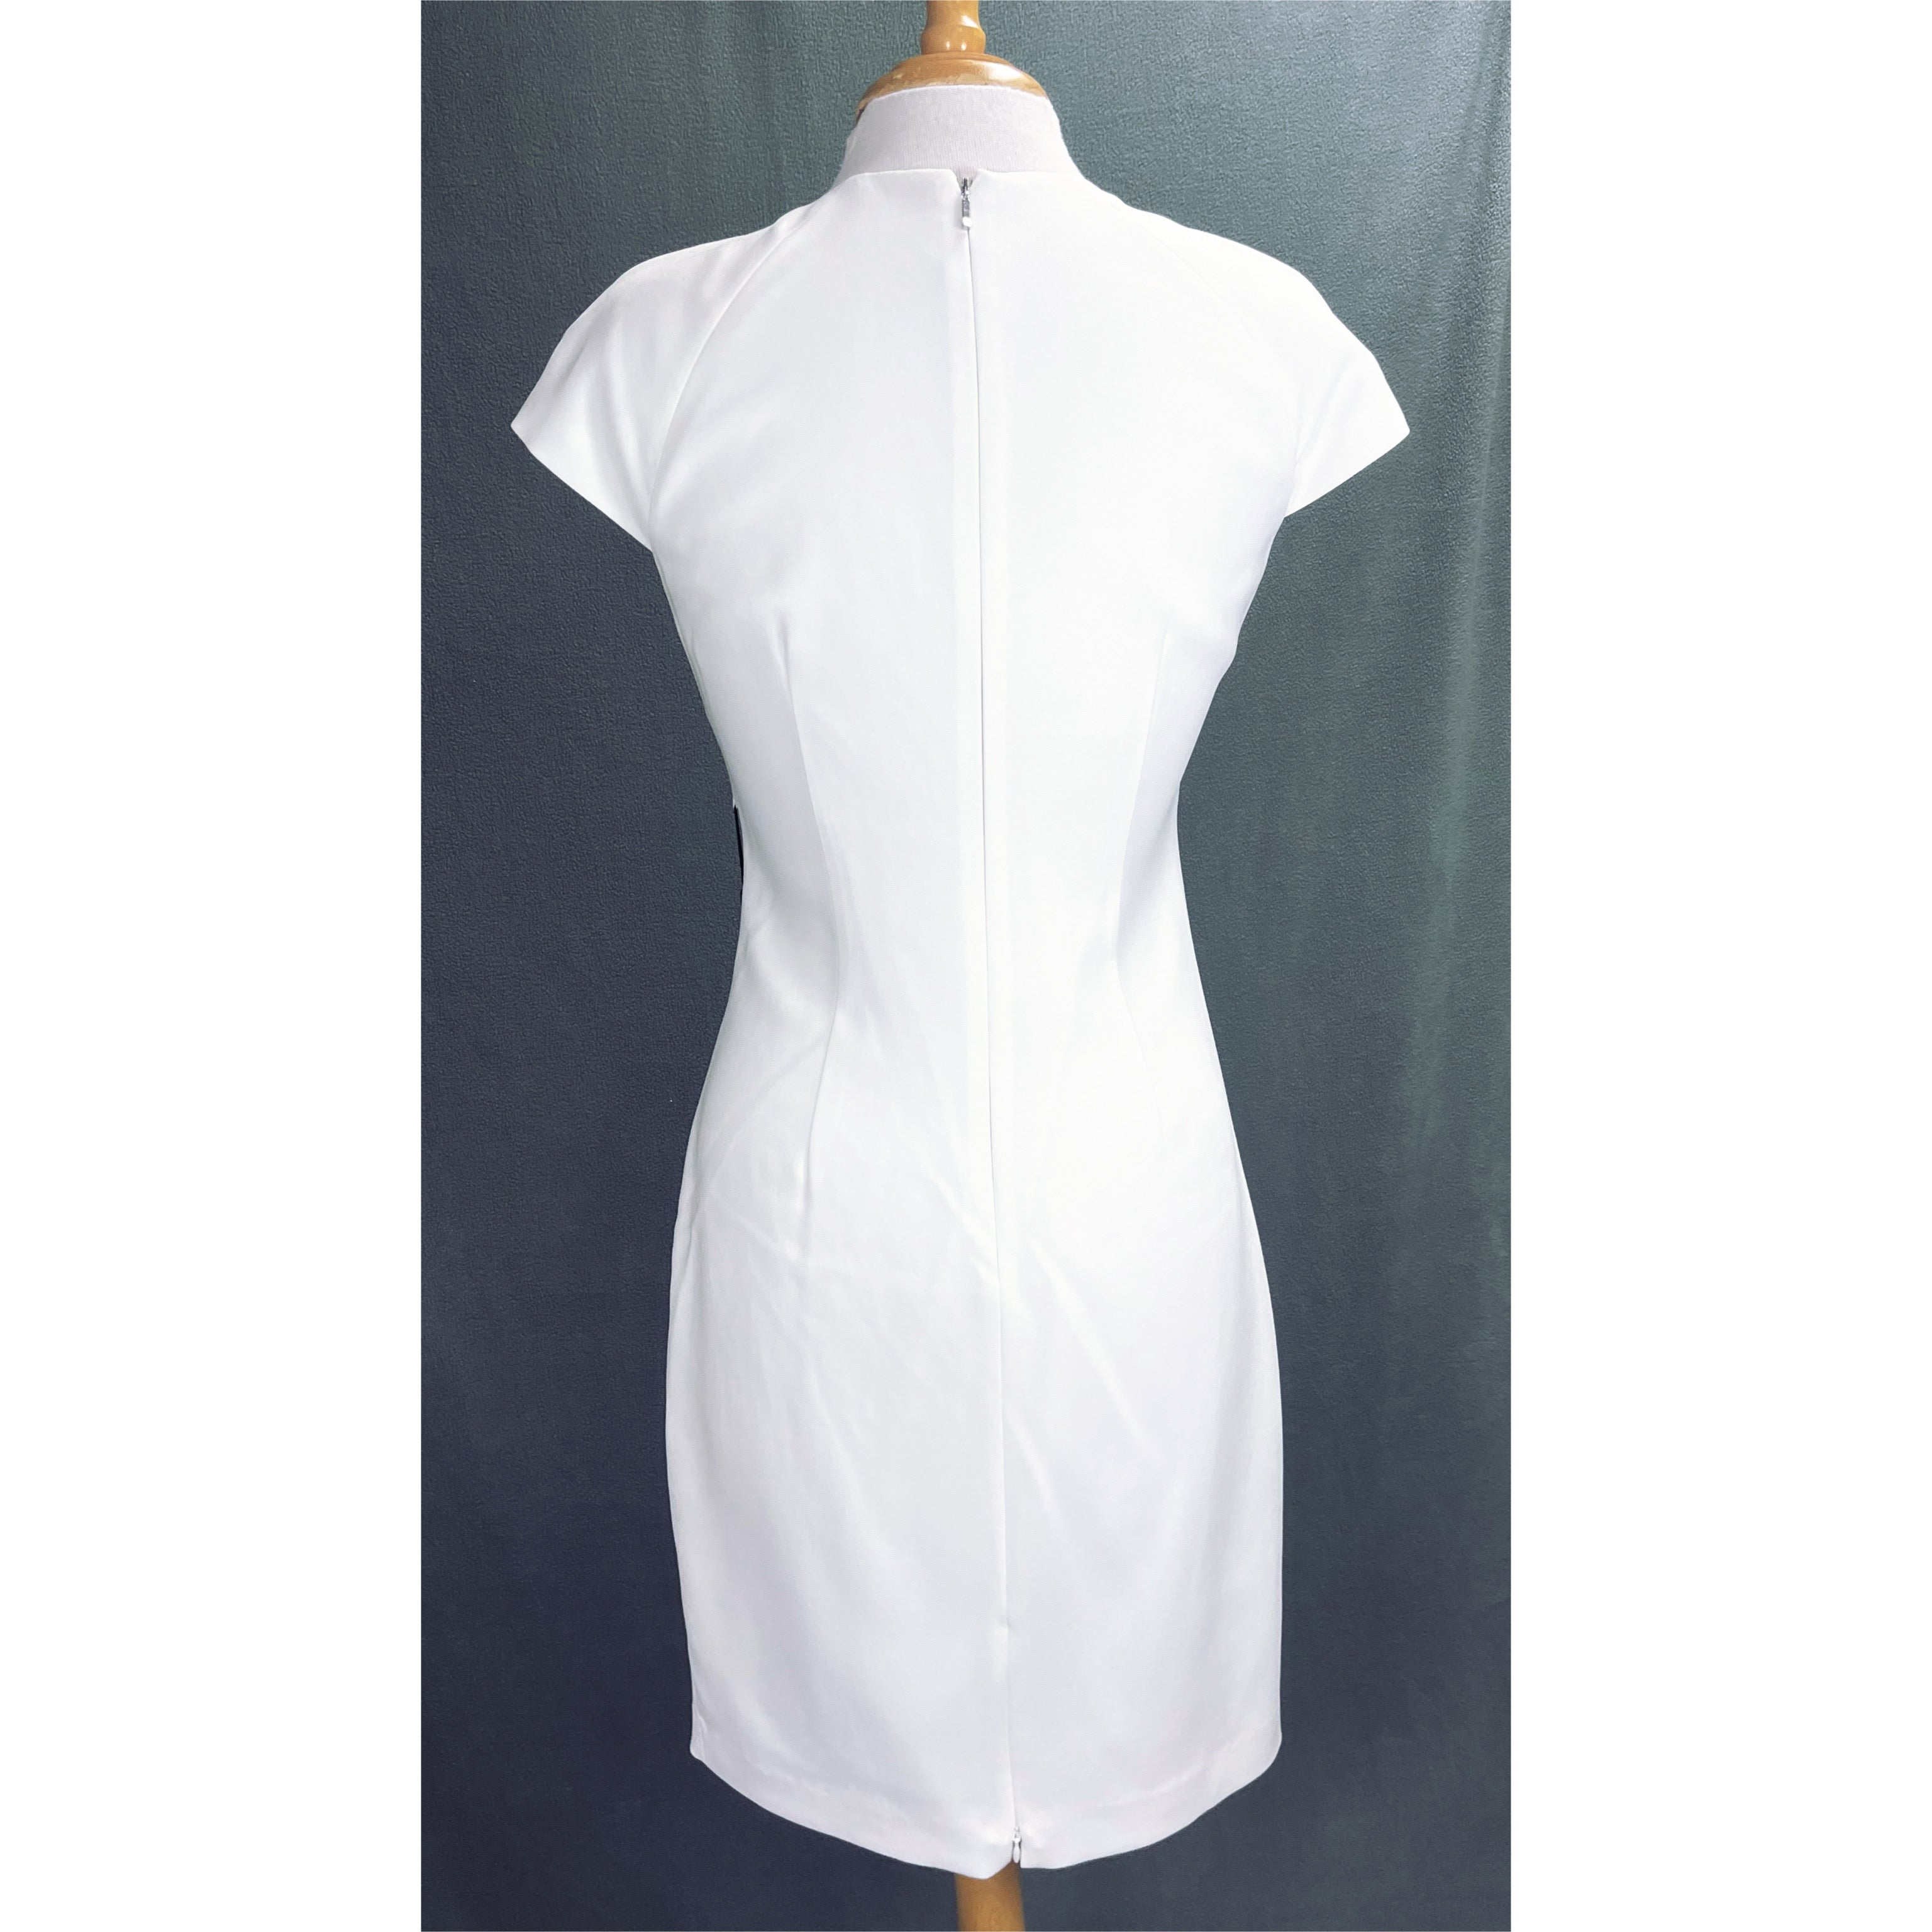 Elie Tahari ivory dress size 8, NEW WITH TAGS!